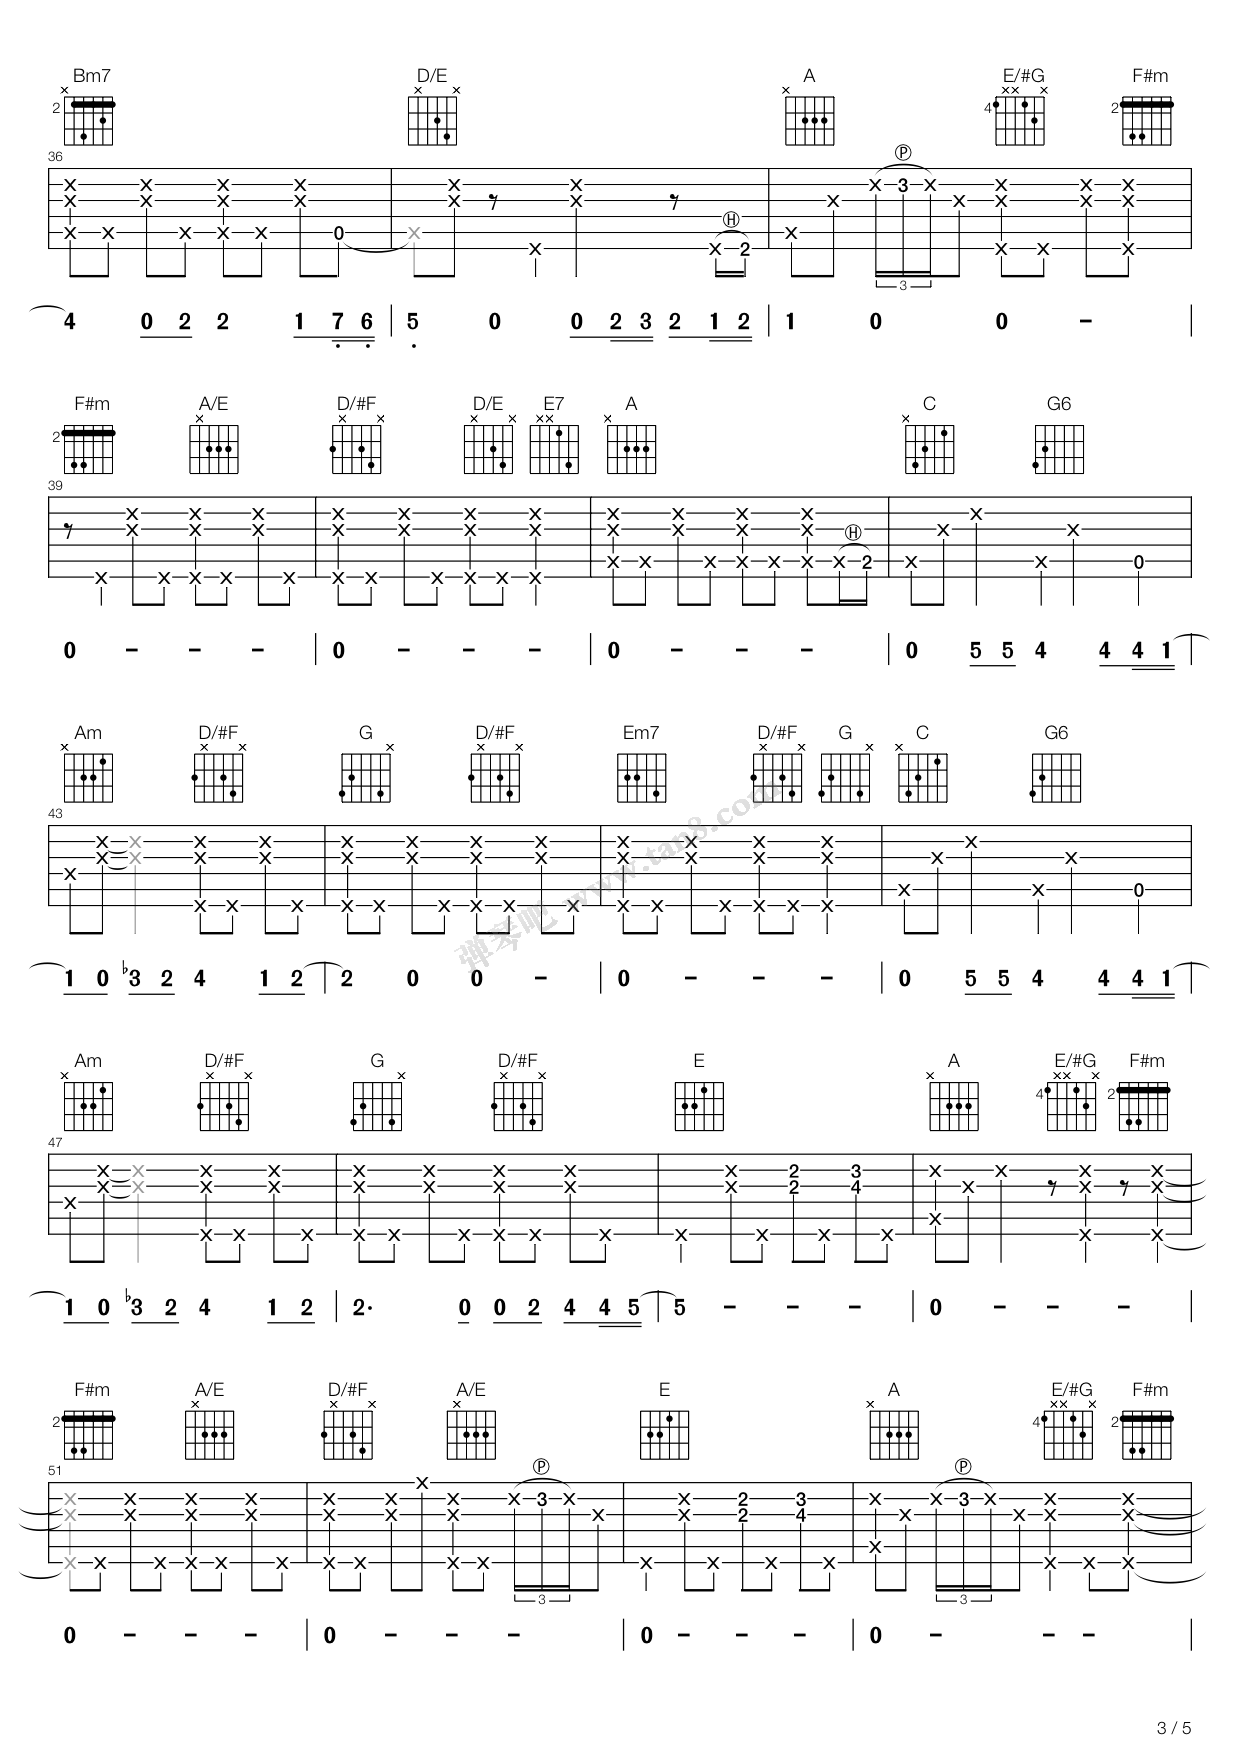 Tears In Heaven Tab by Eric Clapton Guitar Tabs Chords Notes Sheet Music Free